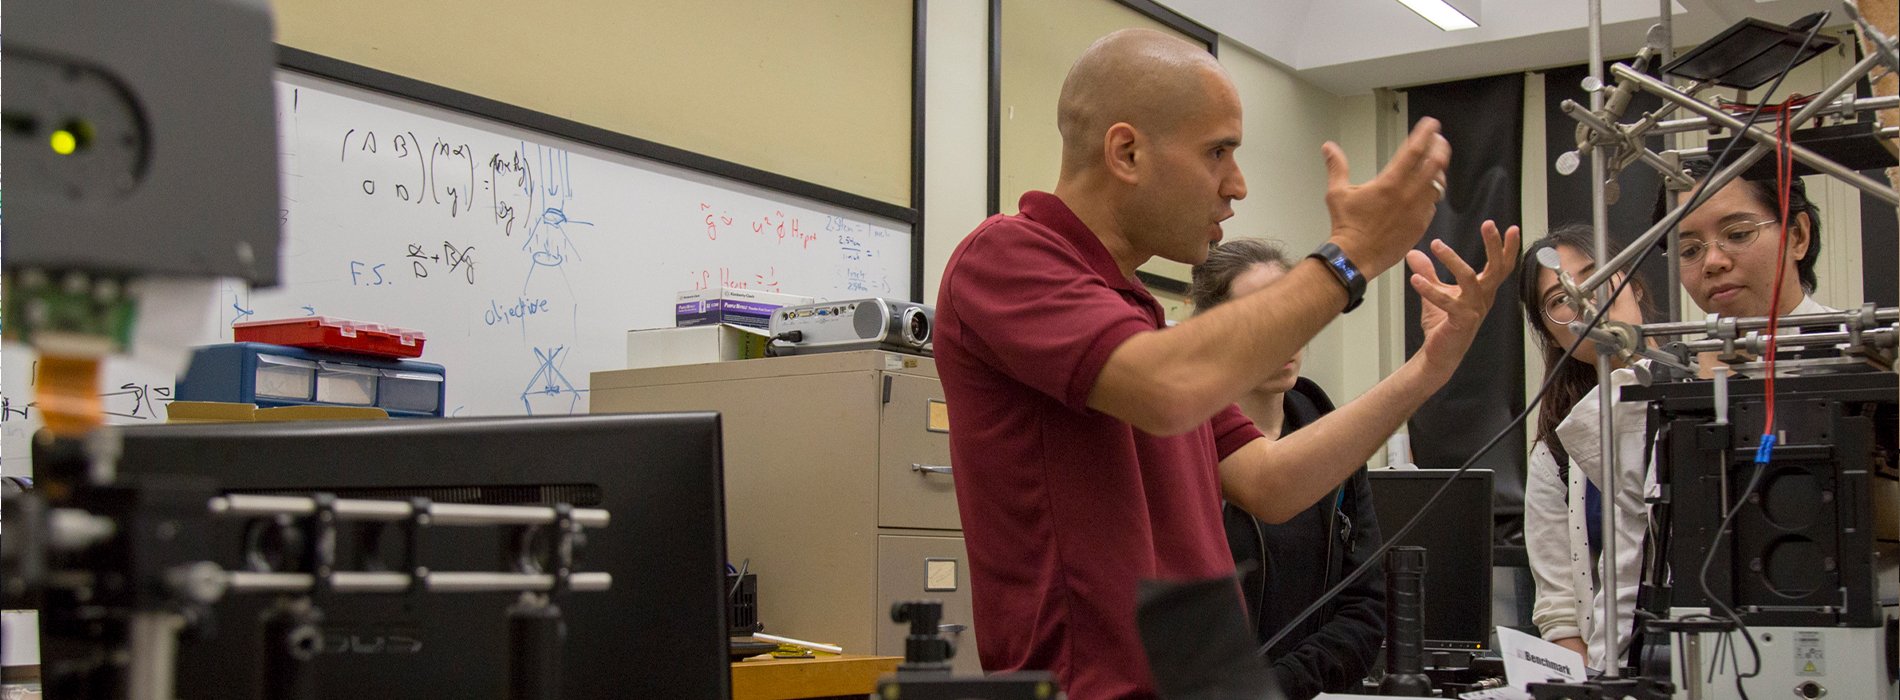 A physics instructor explains a concept to three students while standing in a lab, surrounded by physics equipment and a white board with equations.